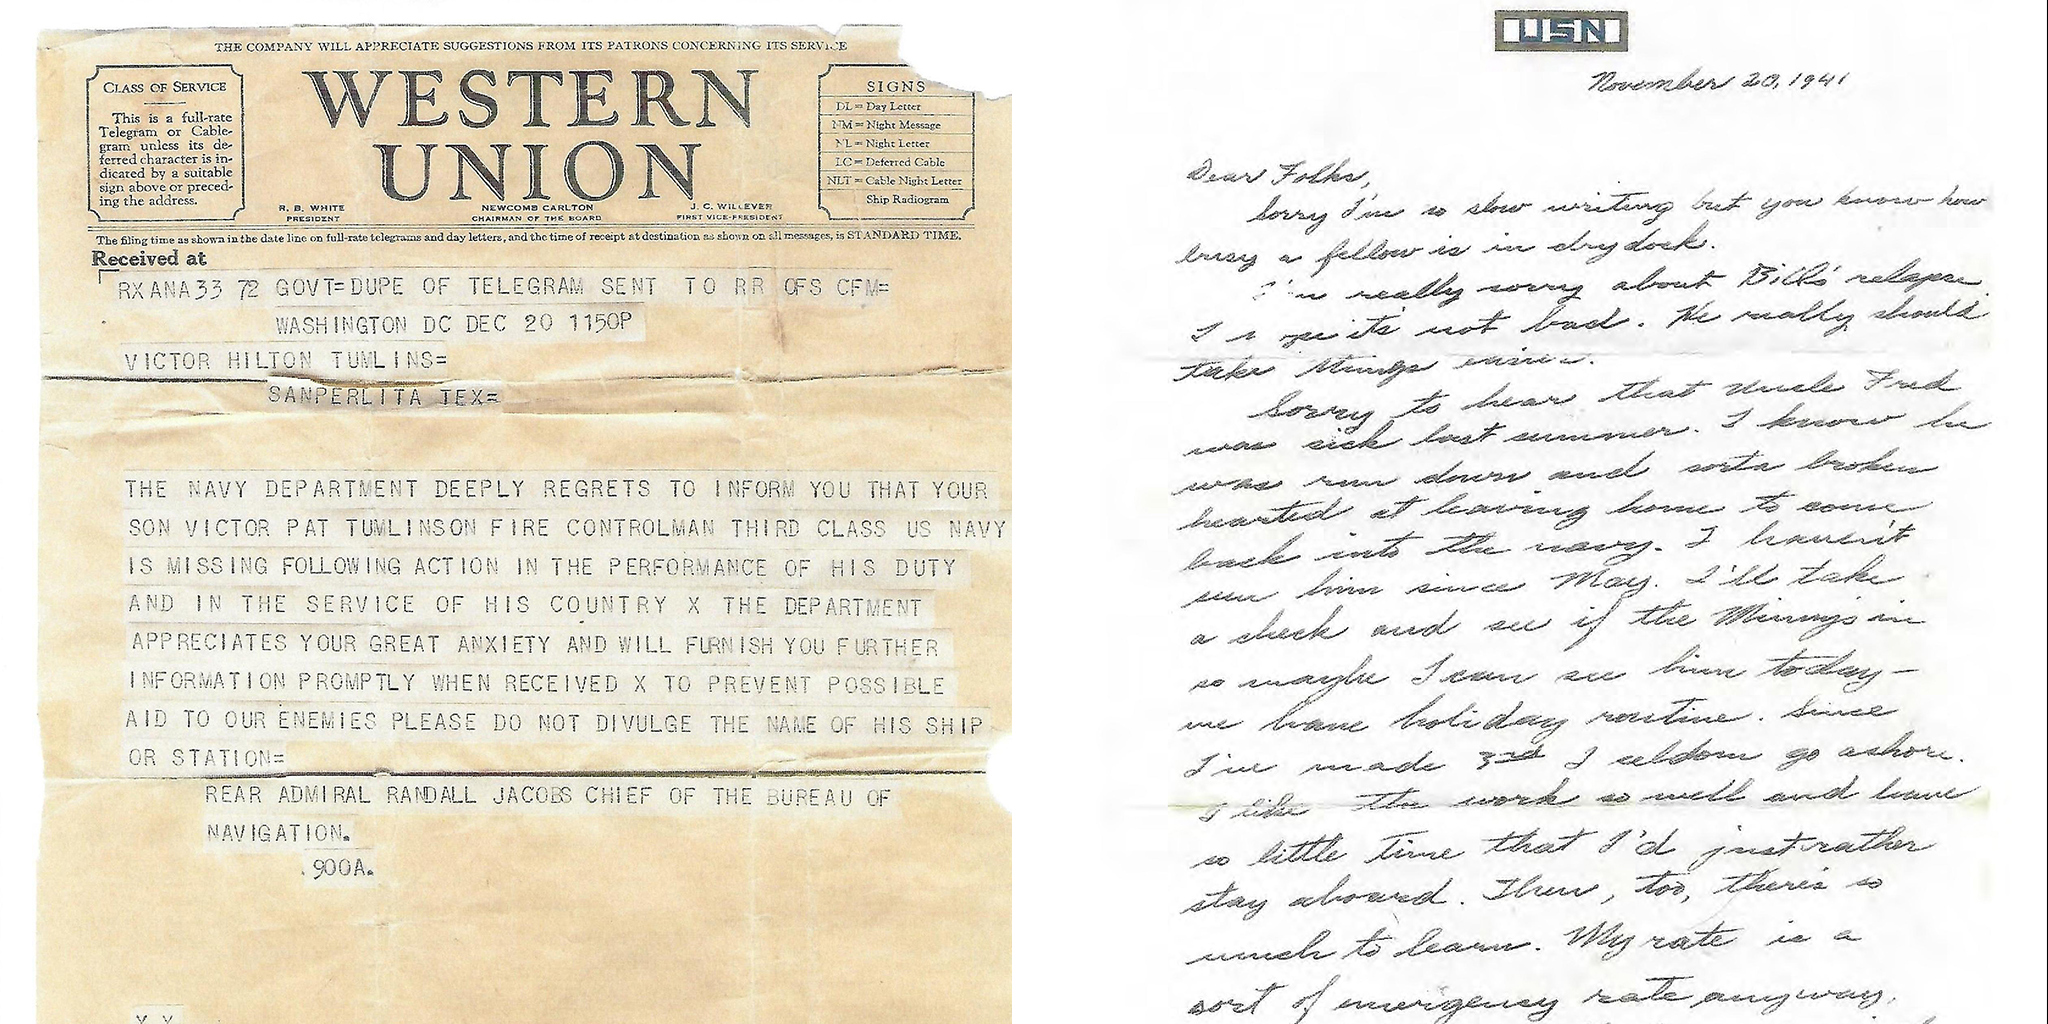 (L) A telegram from the U.S. Navy, dated Dec. 20, 1941, informed the Tumlinson family that Victor "Pat" Tumlinson was missing after the attack on Pearl Harbor. (R) A letter Tumlinson wrote home Nov. 20, 1941—days before he was killed in the attack on Pearl Harbor. (Courtesy of the Tumlinson family)